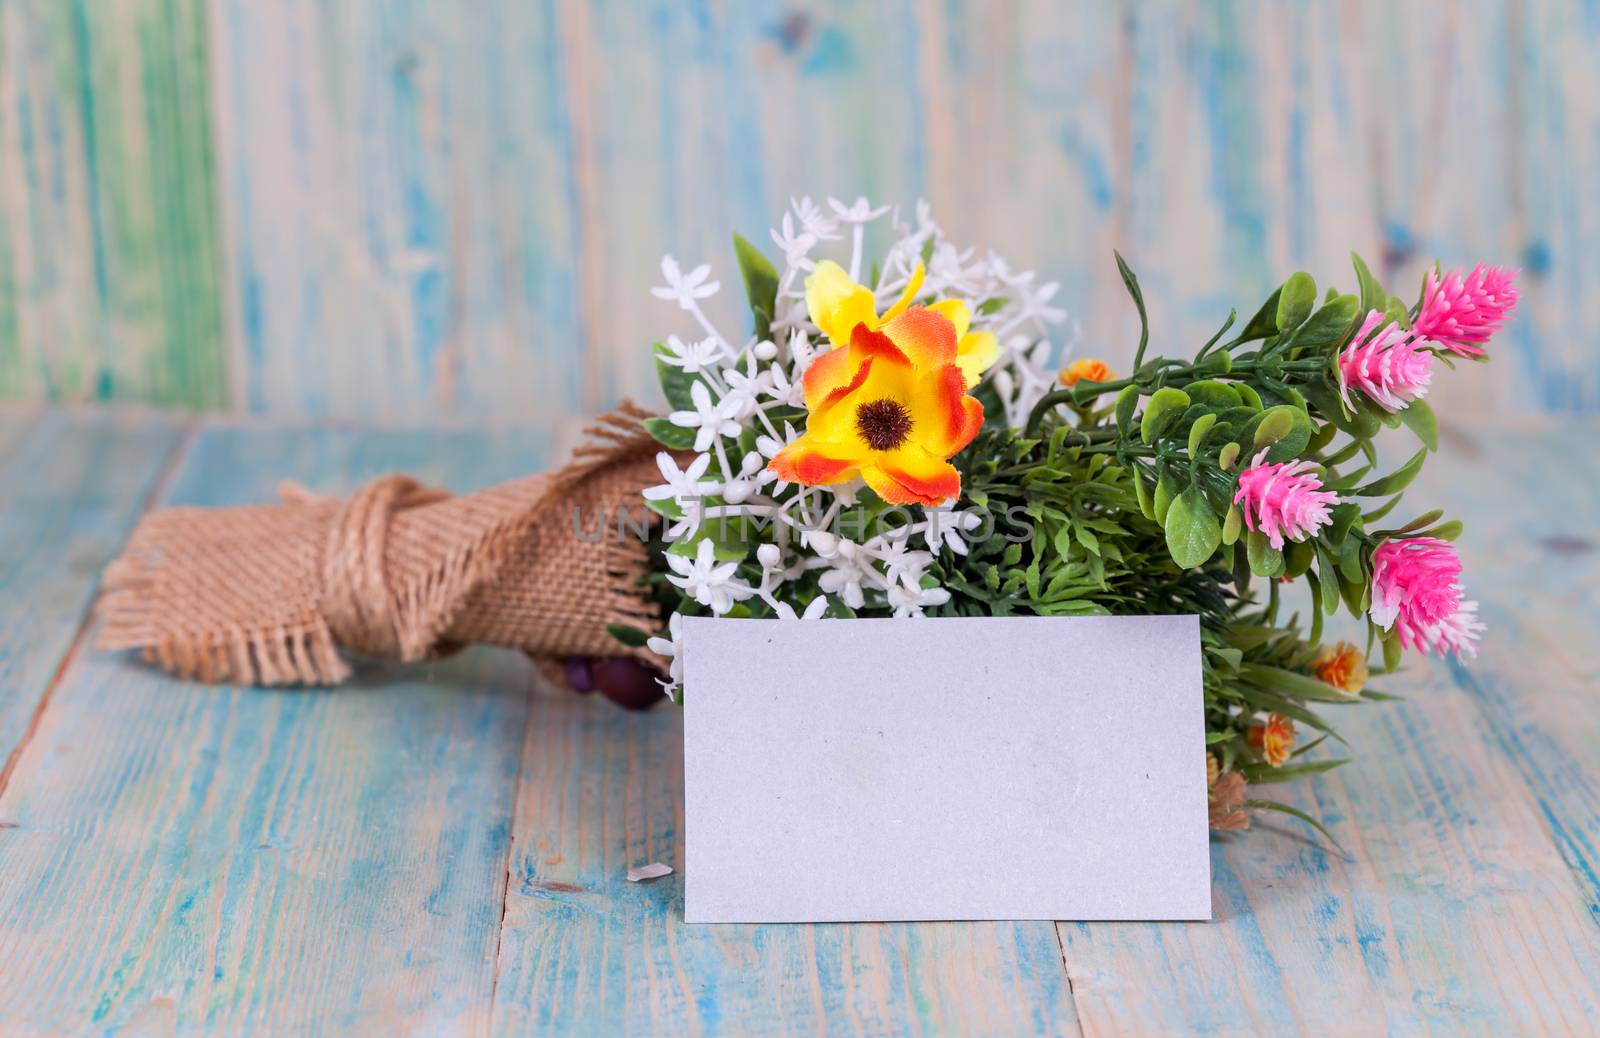 Bouquet of flowers with blank paper tag
